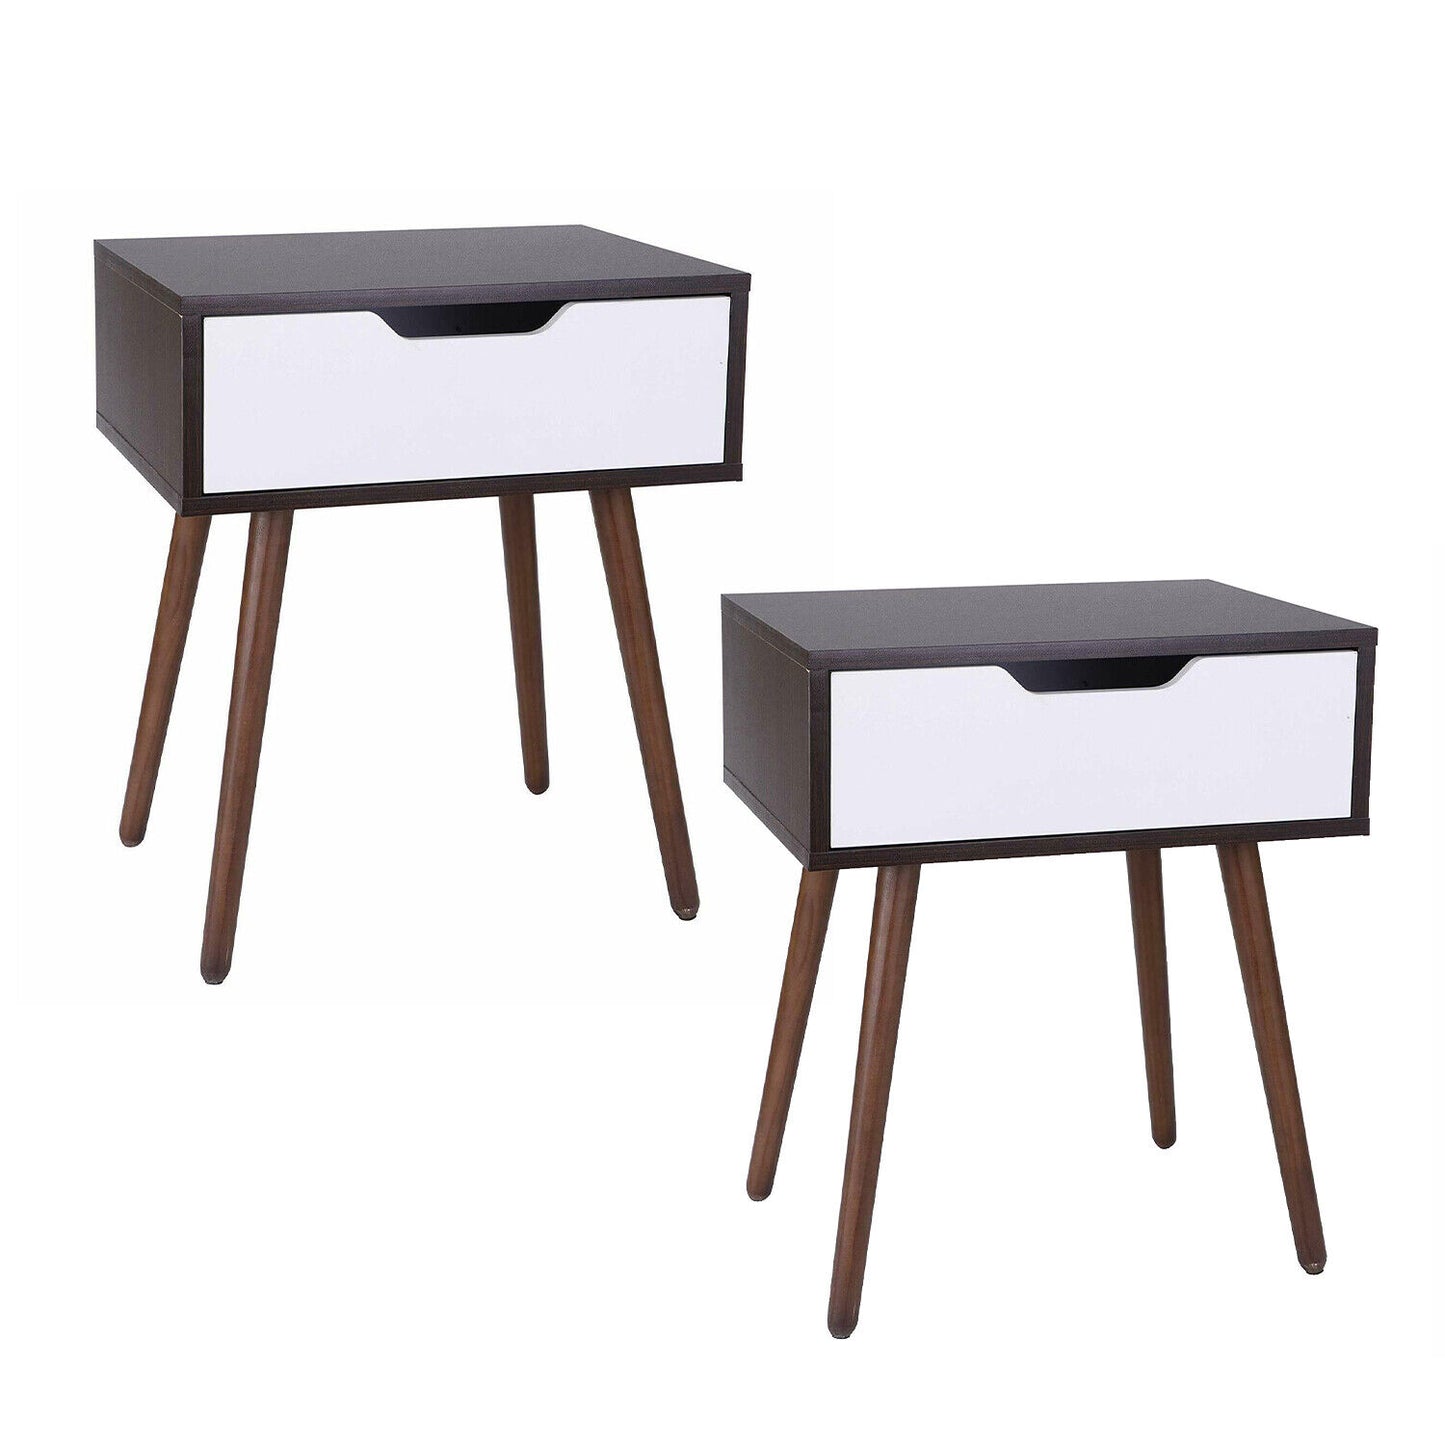 2 Pack Wooden Side End Table w/Drawer for Small Space, Living Room, Bedroom